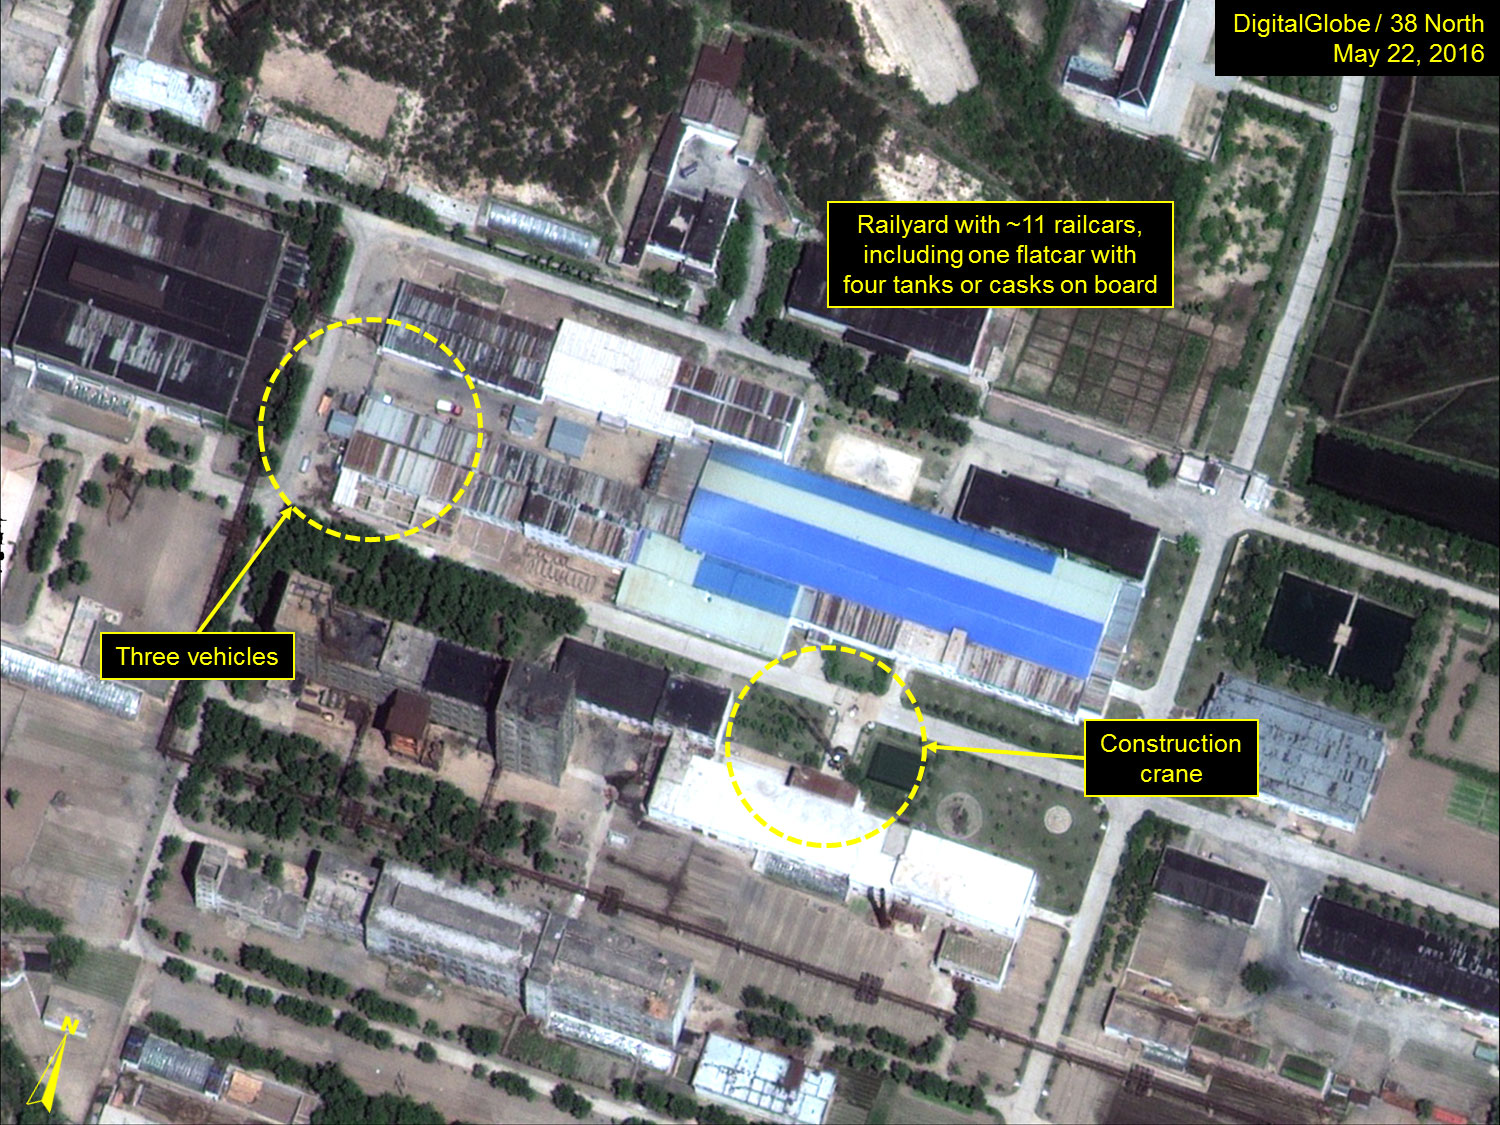 New Evidence of Probable Plutonium Production at the Yongbyon Nuclear Facility